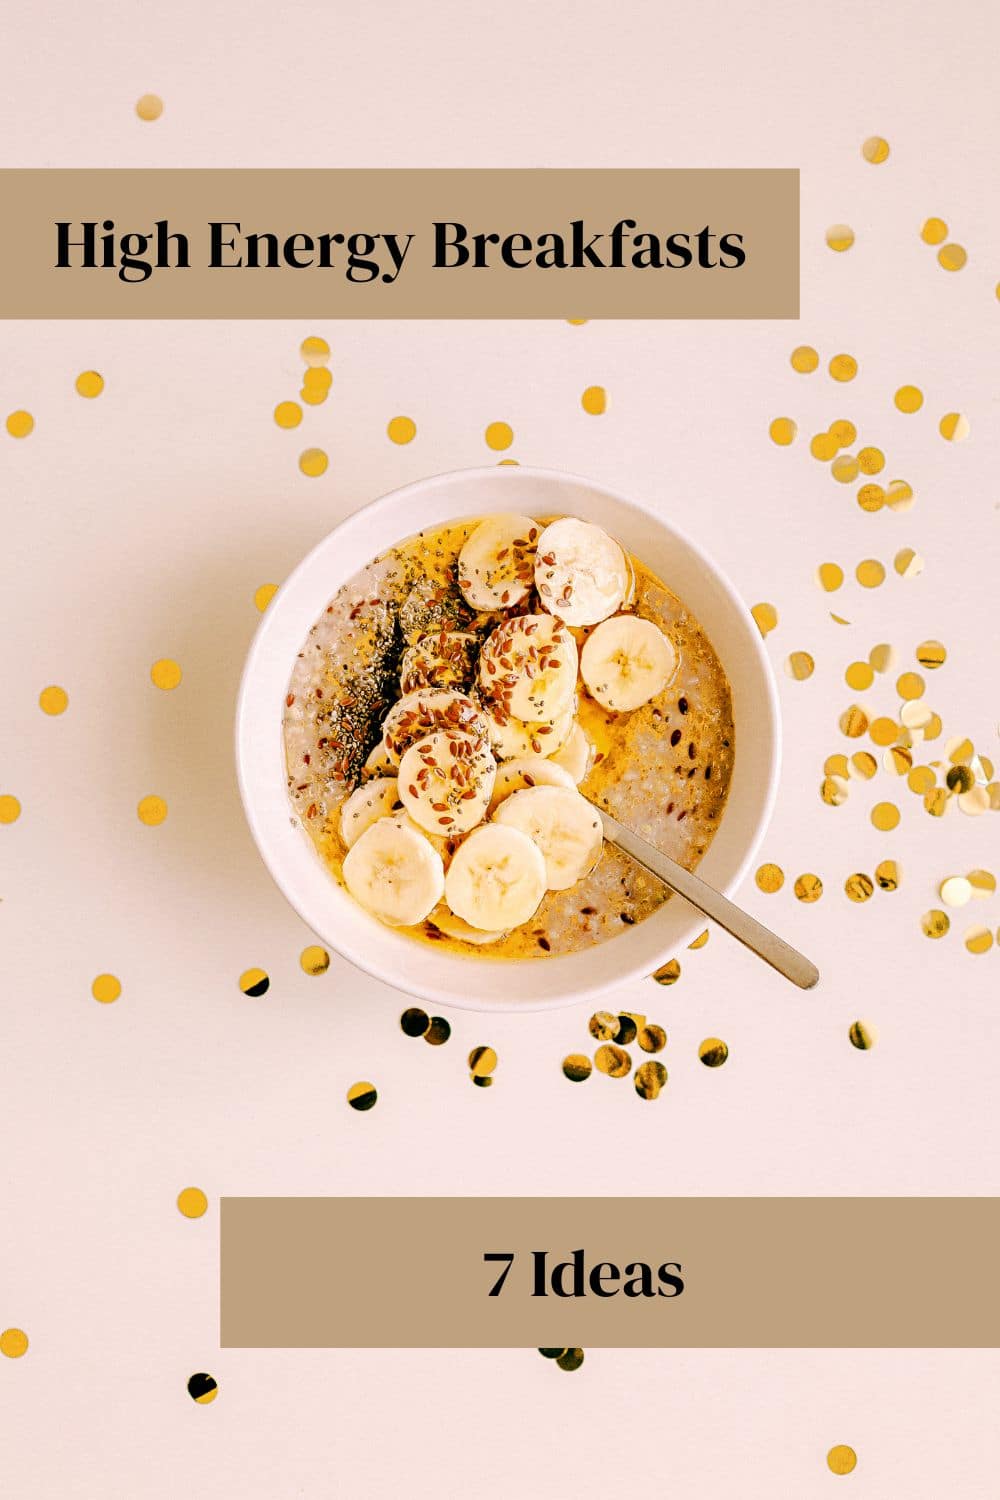 7 Awesome Breakfast Power Foods To Consume For Big Energy